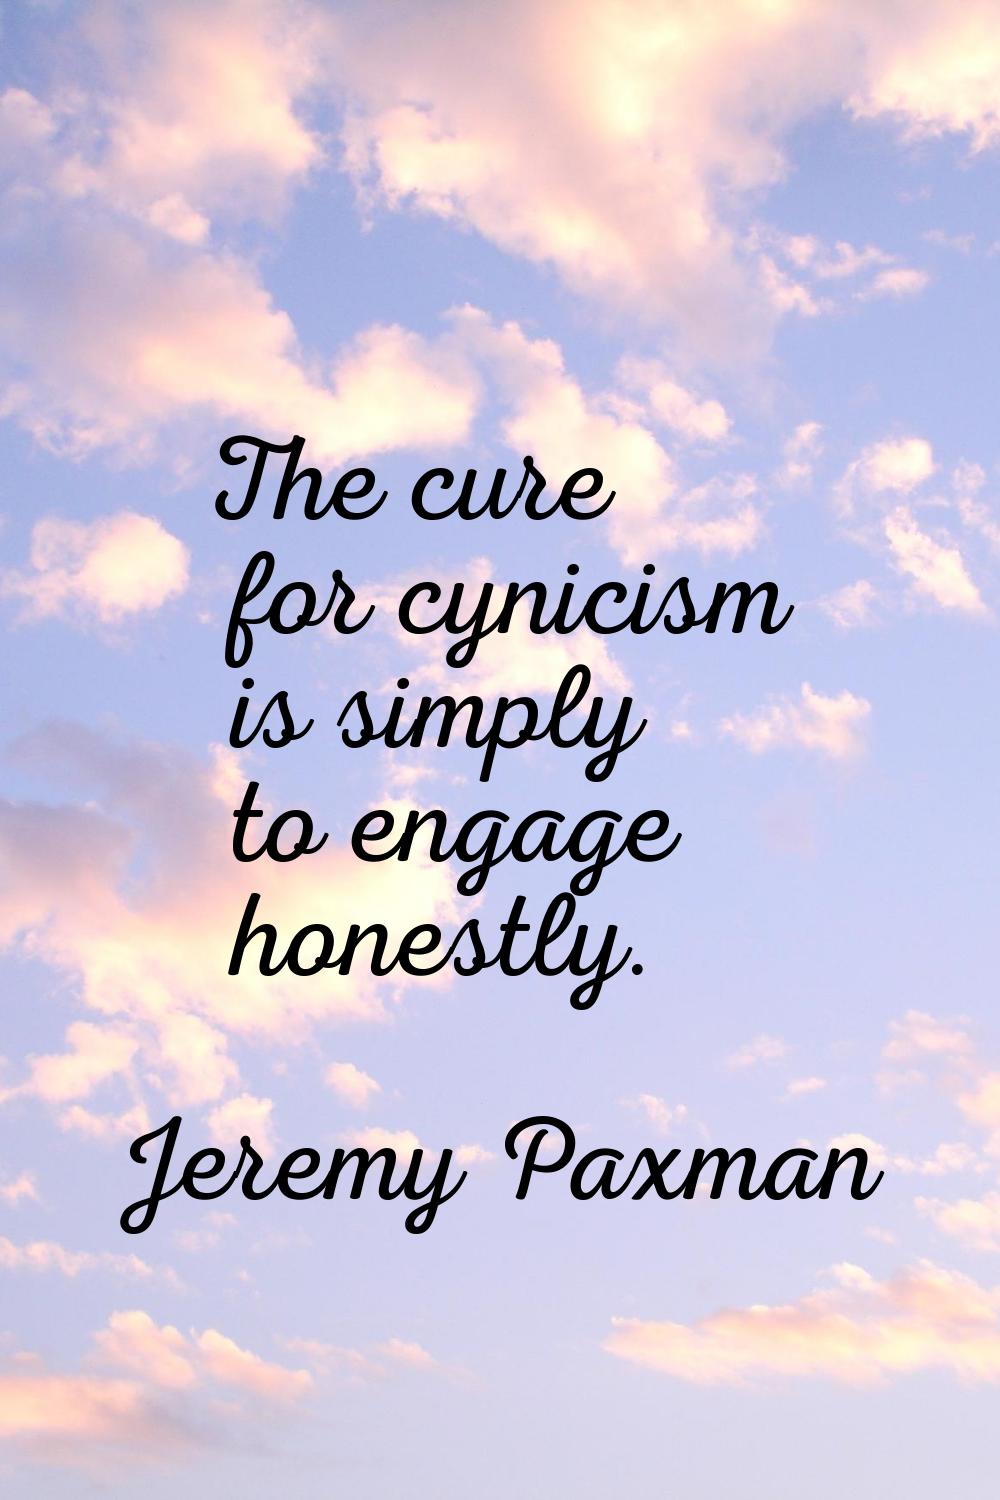 The cure for cynicism is simply to engage honestly.